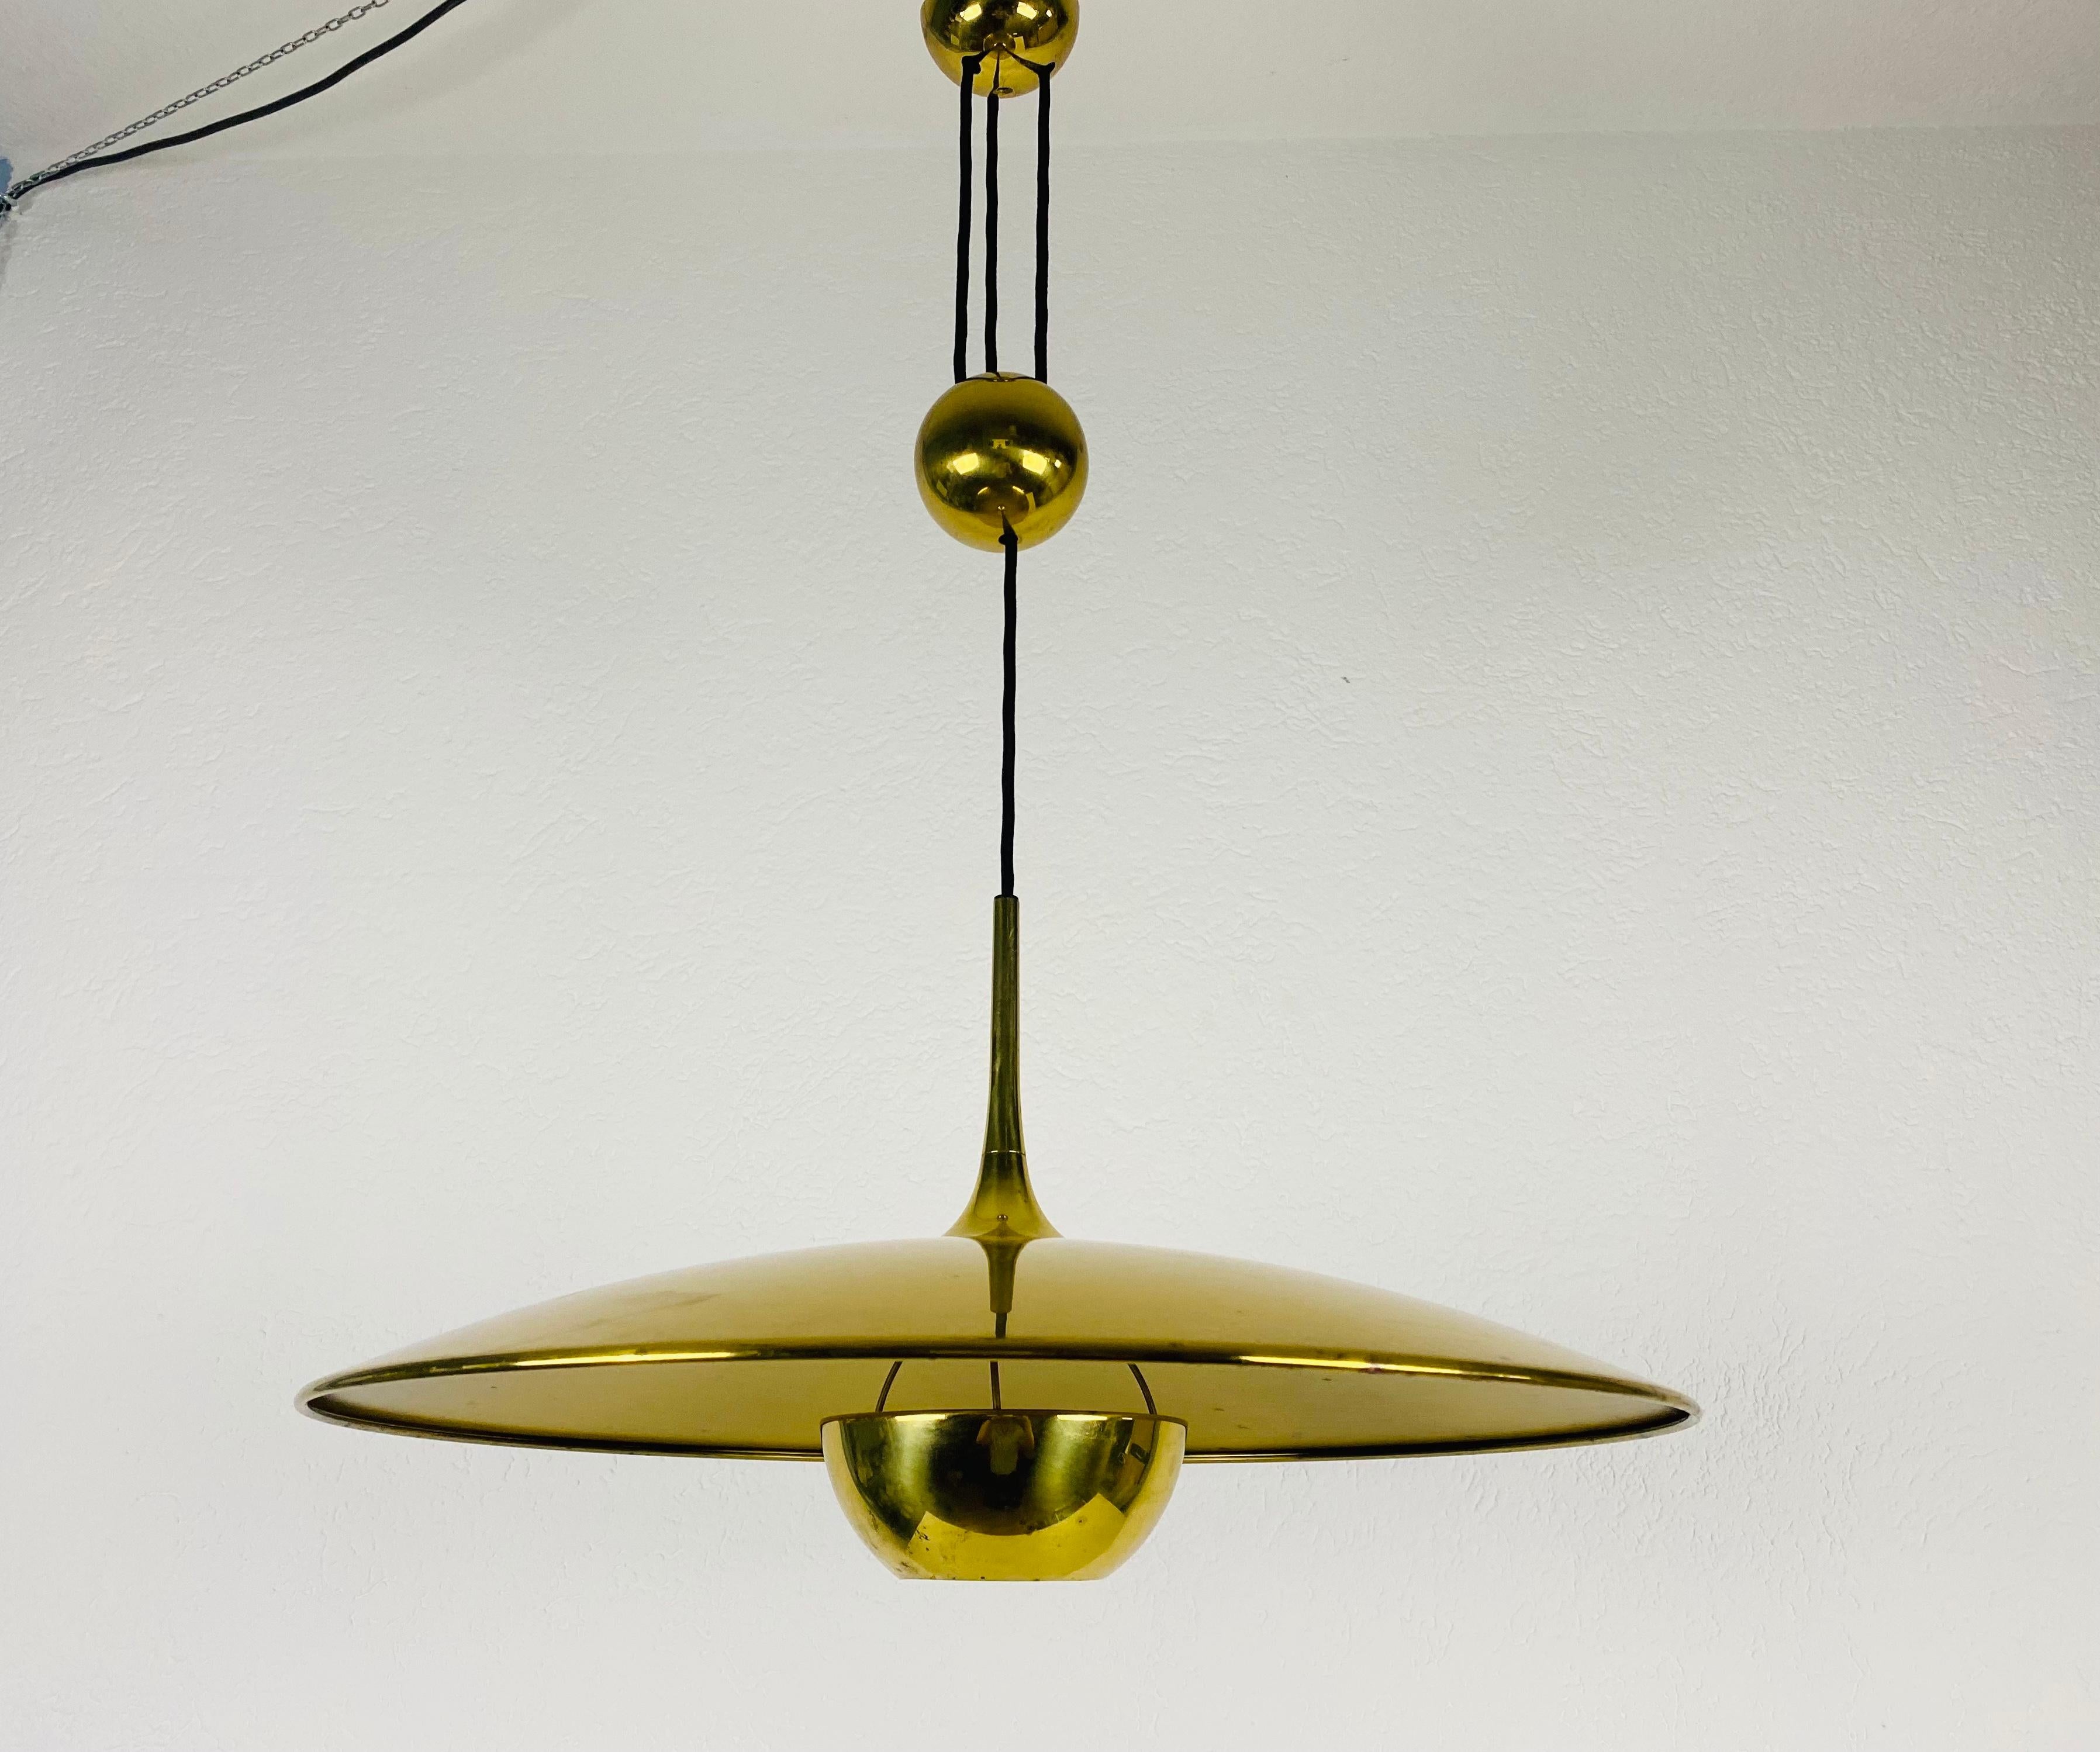 'Onos 55' Brass Pendant Lamp with Counterweight by Florian Schulz, 1970s Germany 8